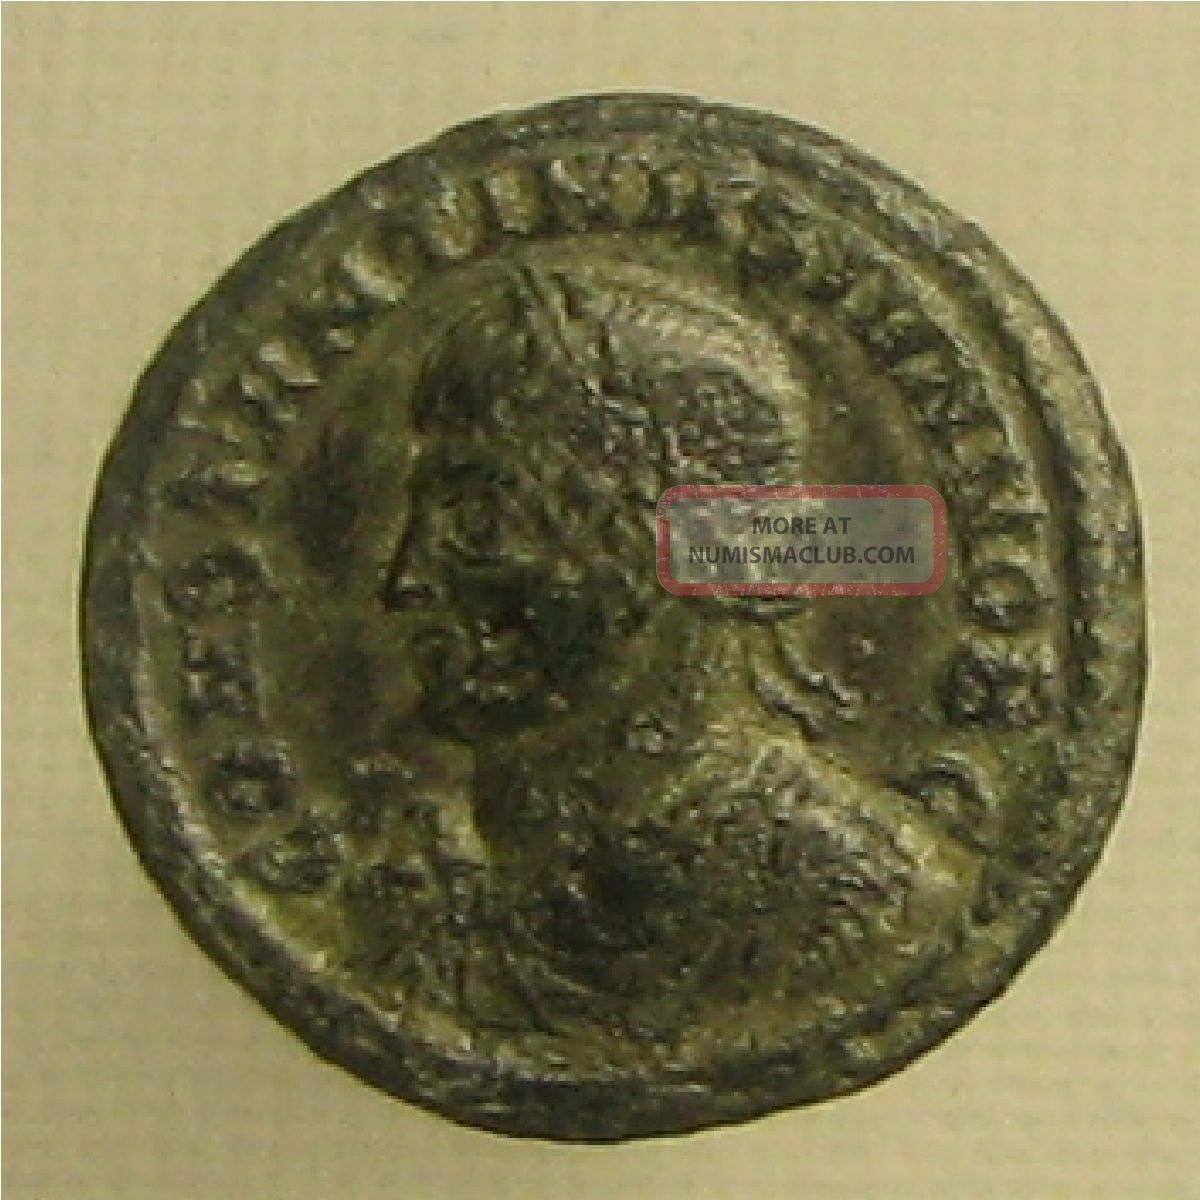 Silver - Washed Constantine Ii 